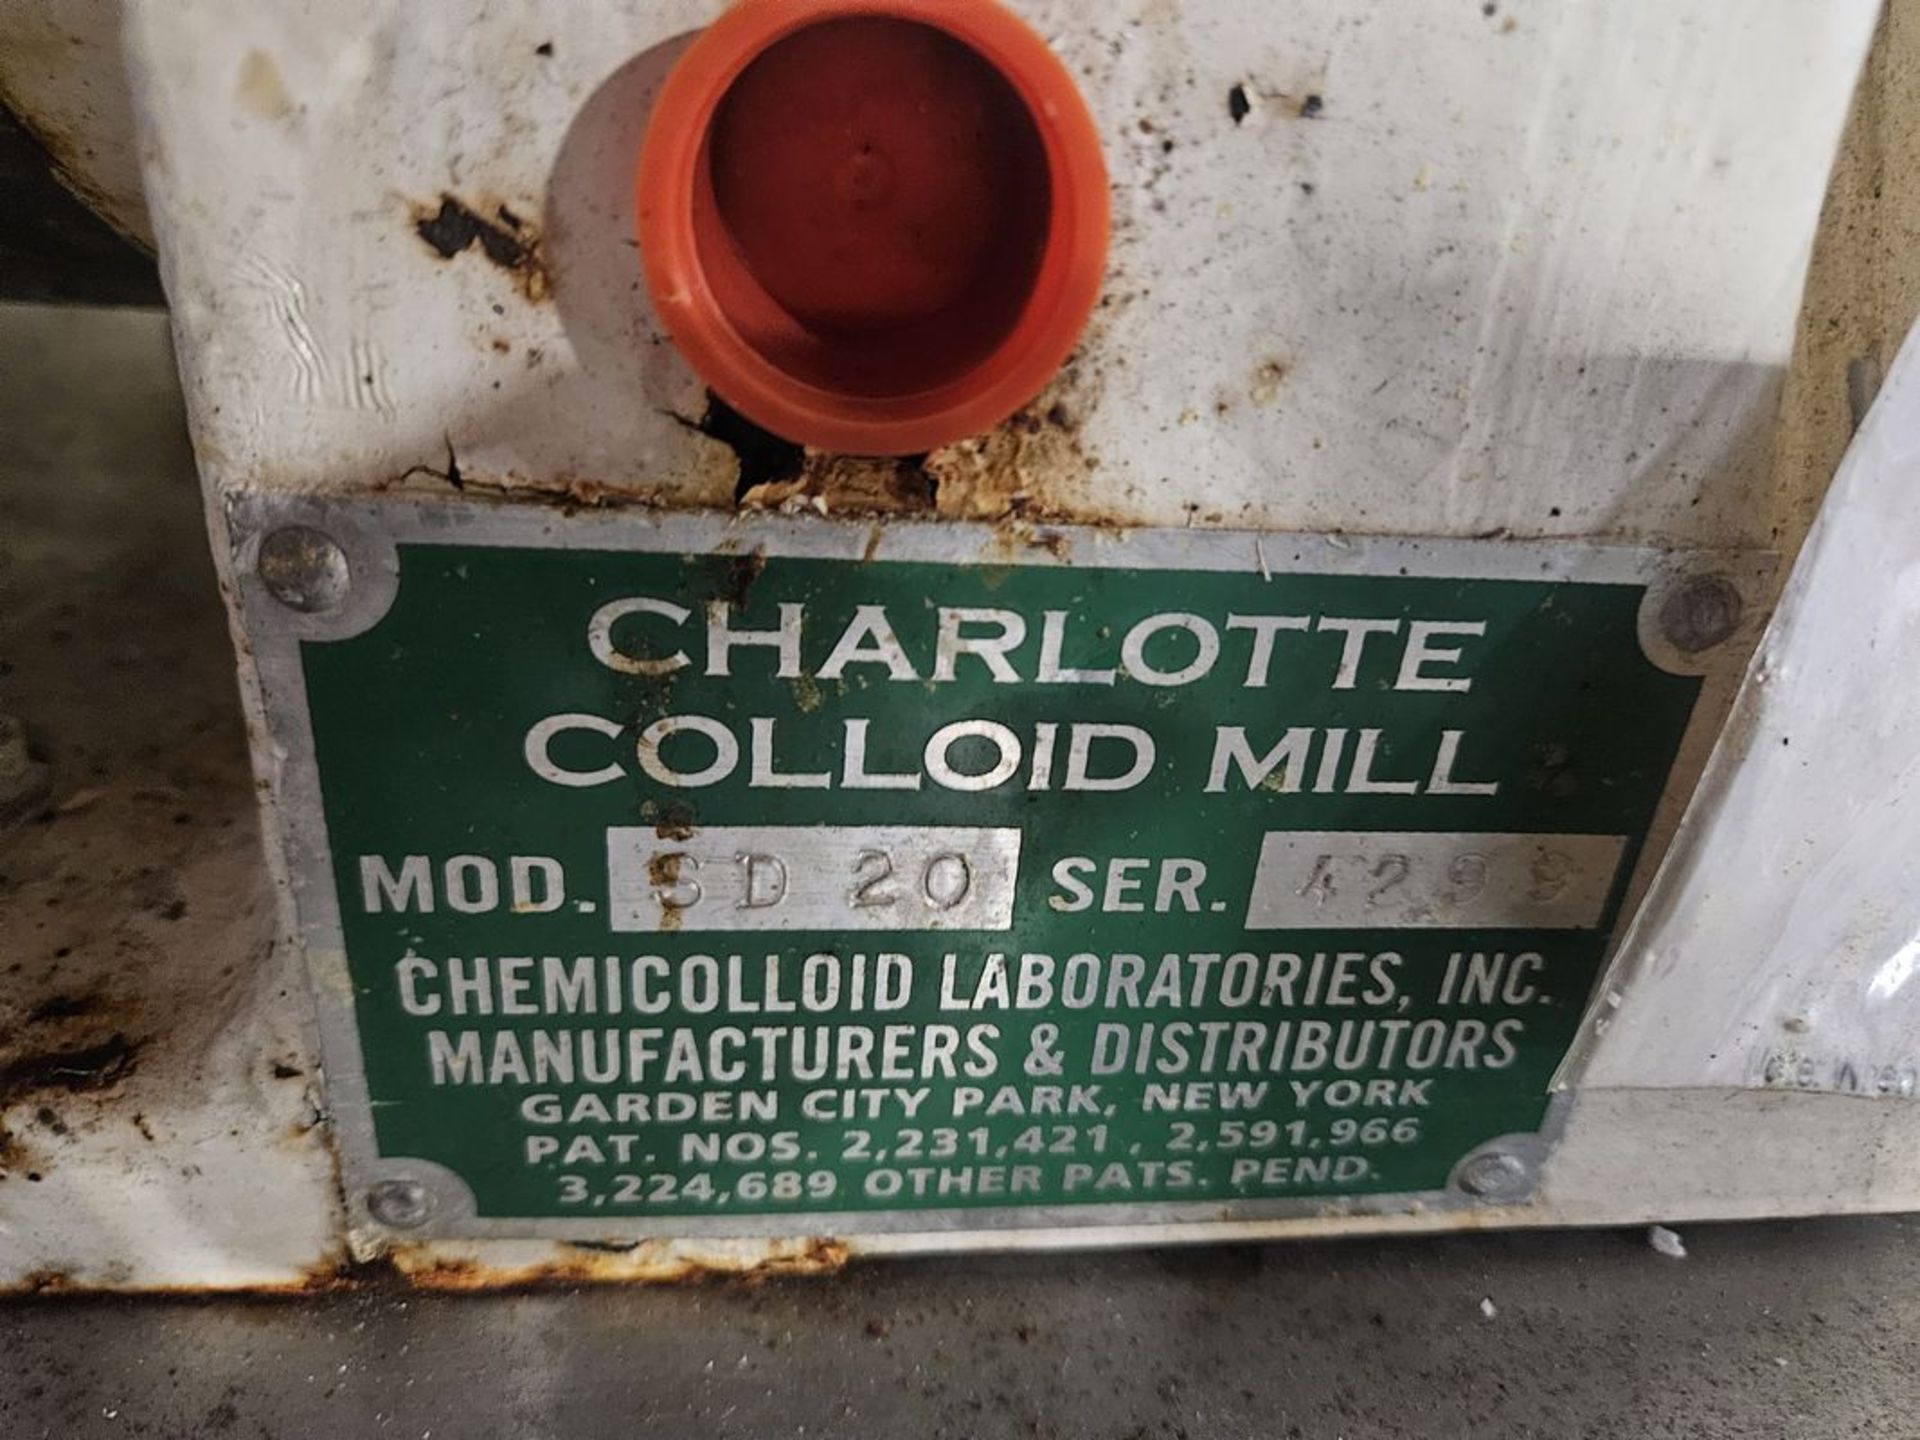 Charlotte SD 20 Colloid Mill - Image 4 of 4